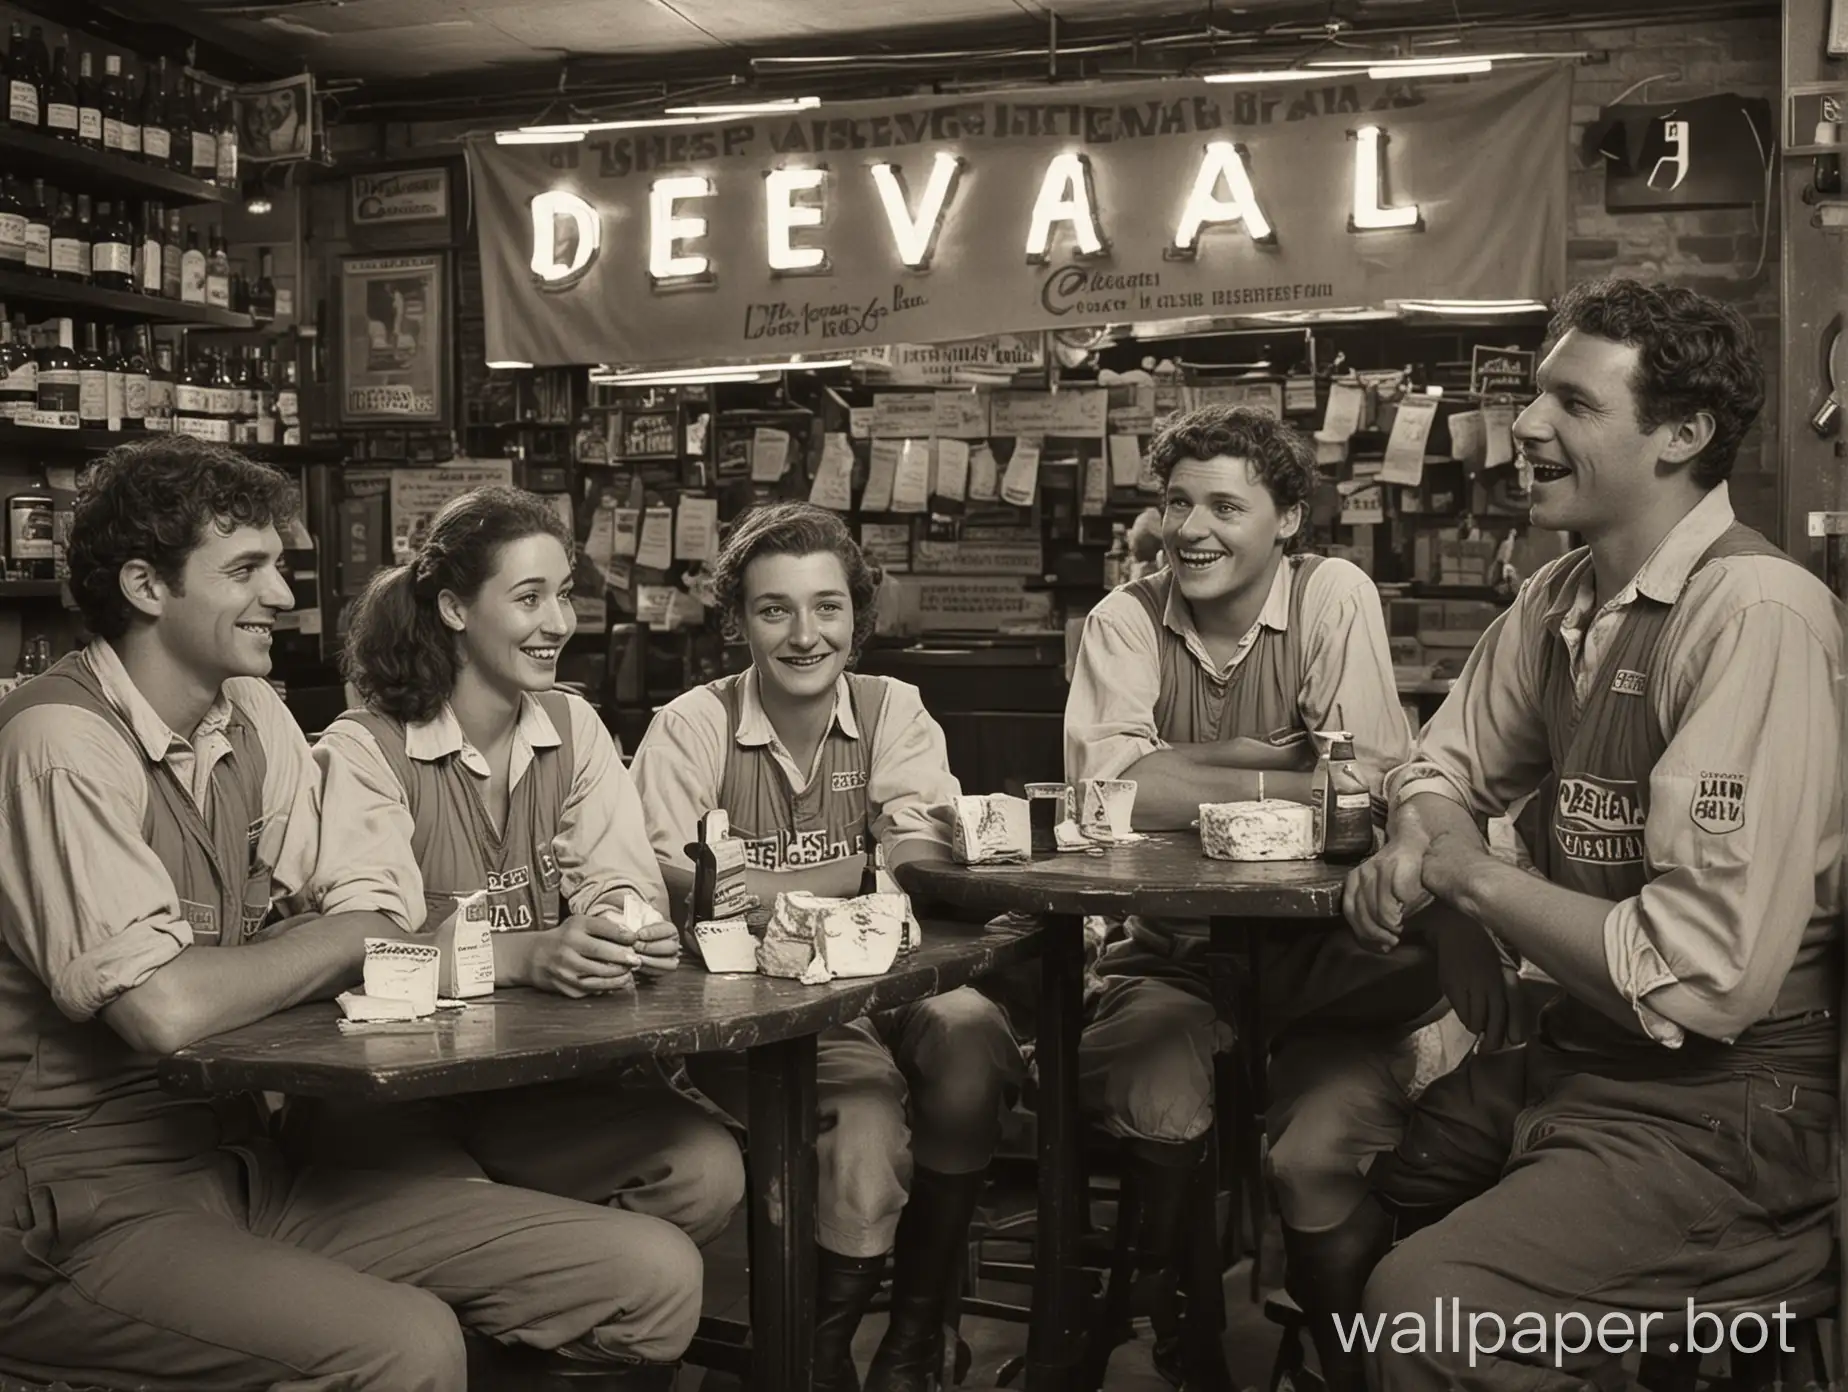 A group of dairy farmers eating lots of cheese at a bar, chatting. Their clothes clearly show the word "DeLaval" in clearly readable letters. There is cheese everywhere. In the back there is a banner on the wall that also reads "DELAVAL" in big capital neon letters.